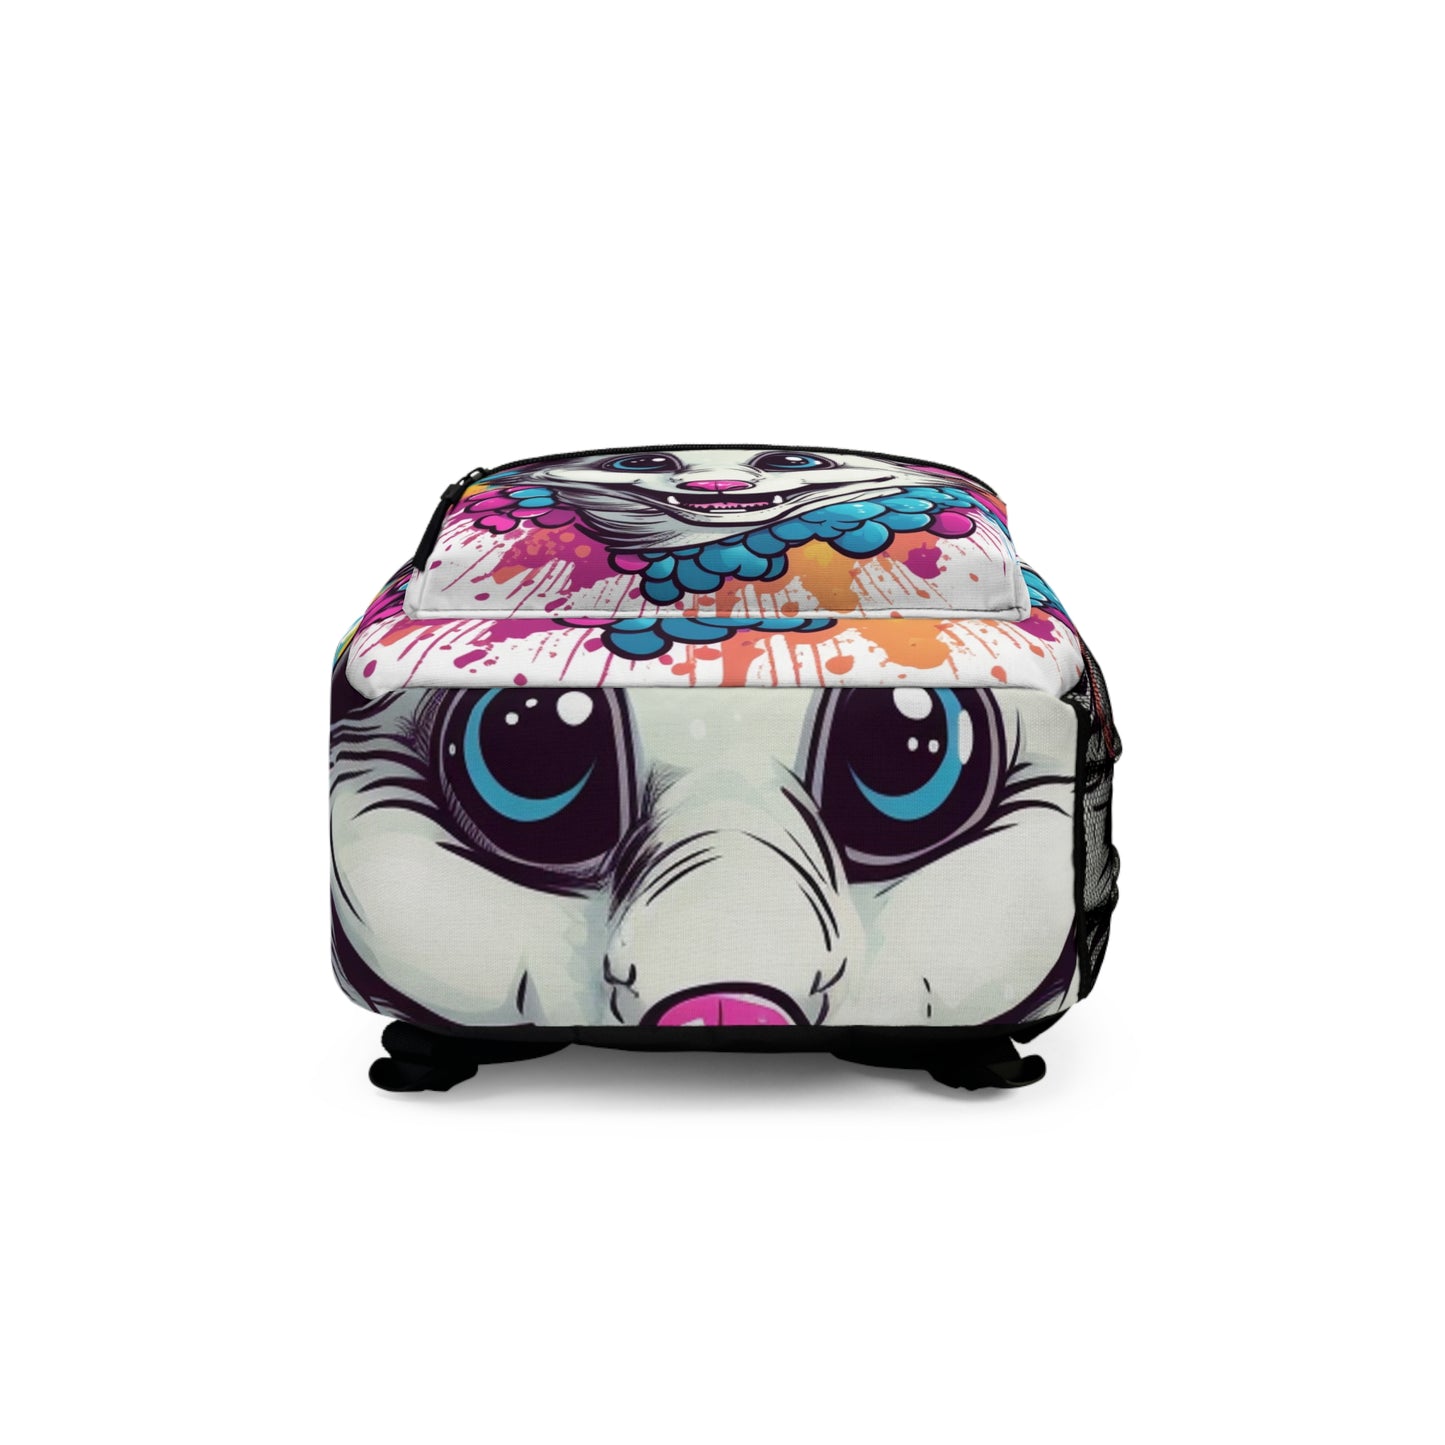 Opossum Animal Creature Anime Character Animation Backpack